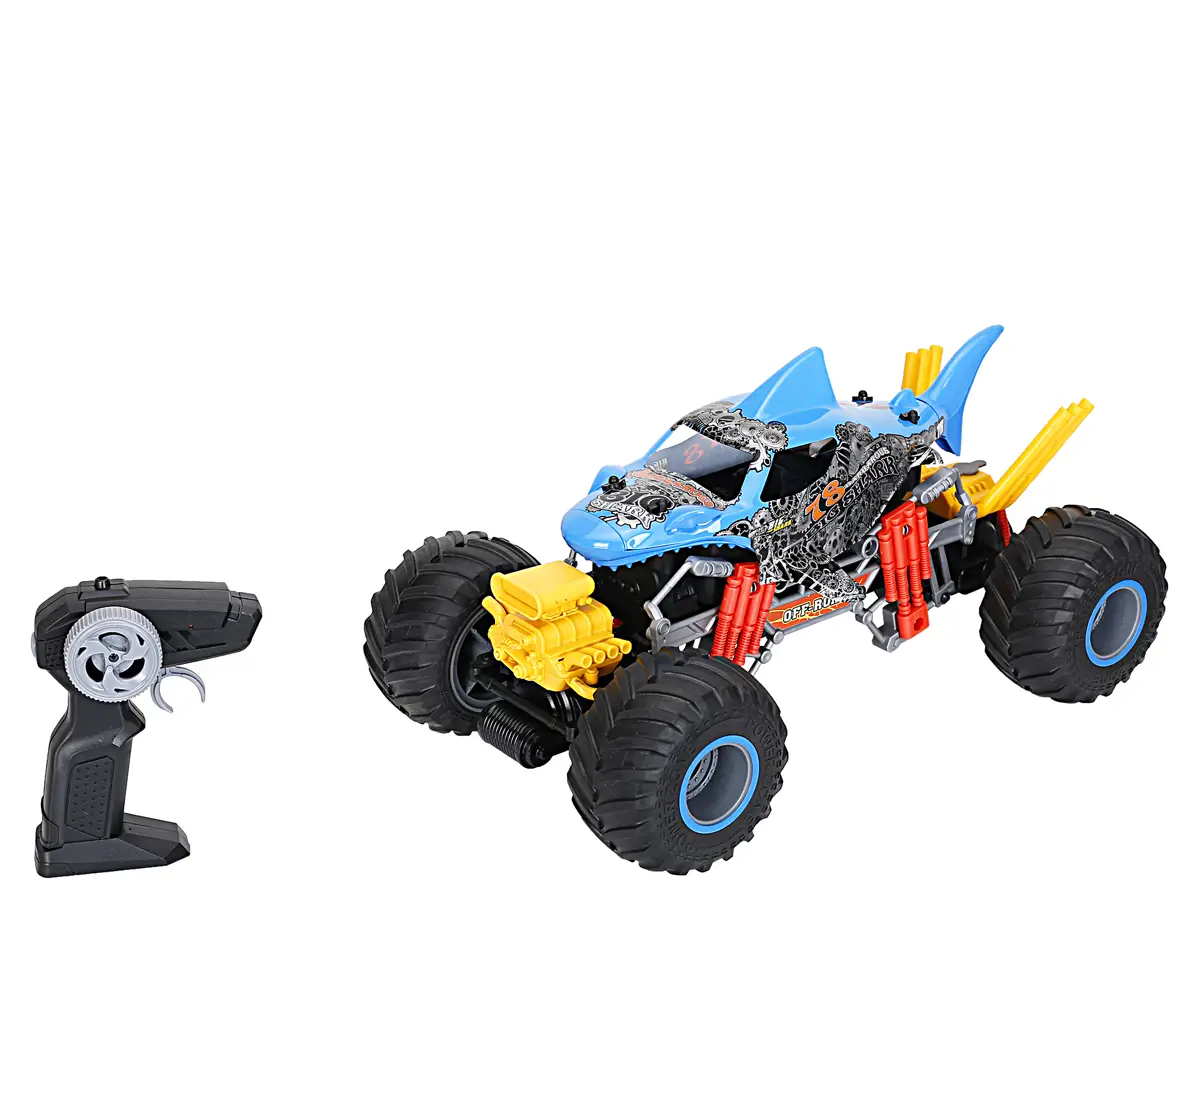 Ralleyz 2.4G 1:10 Shark With Smoking Blue Remote Control Car for kids 8Y+, Multicolour